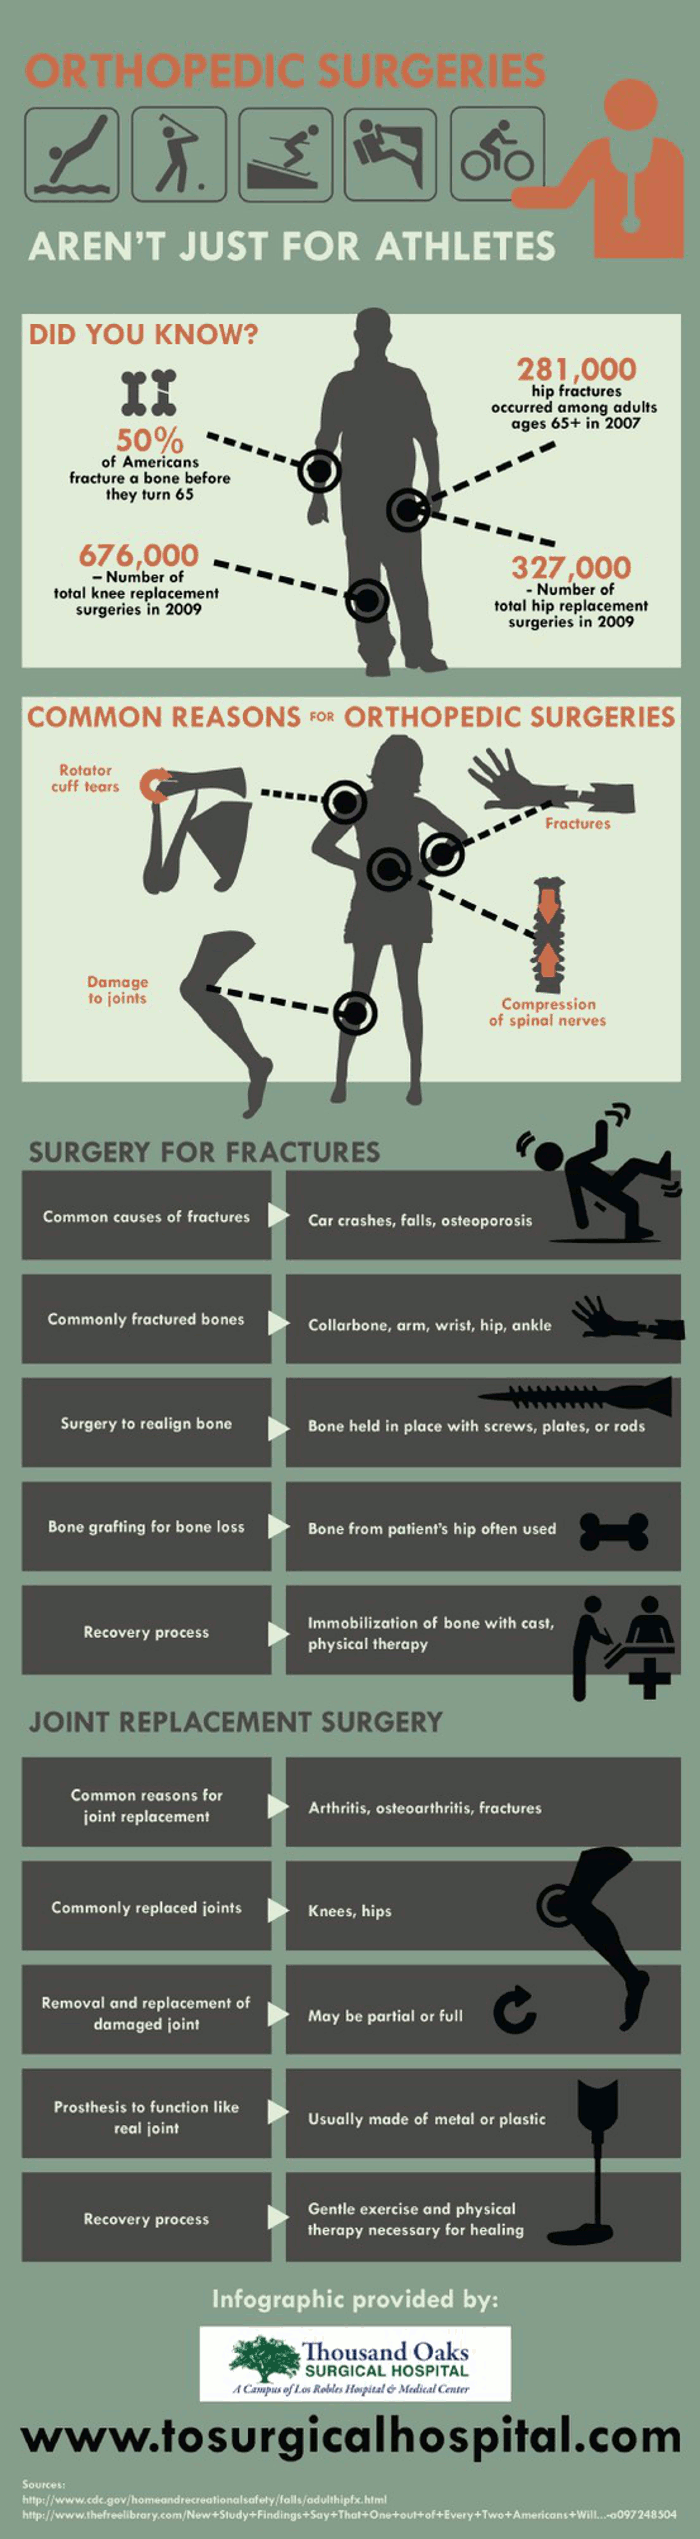 Orthopedic Surgeries Arent Just For Athletes